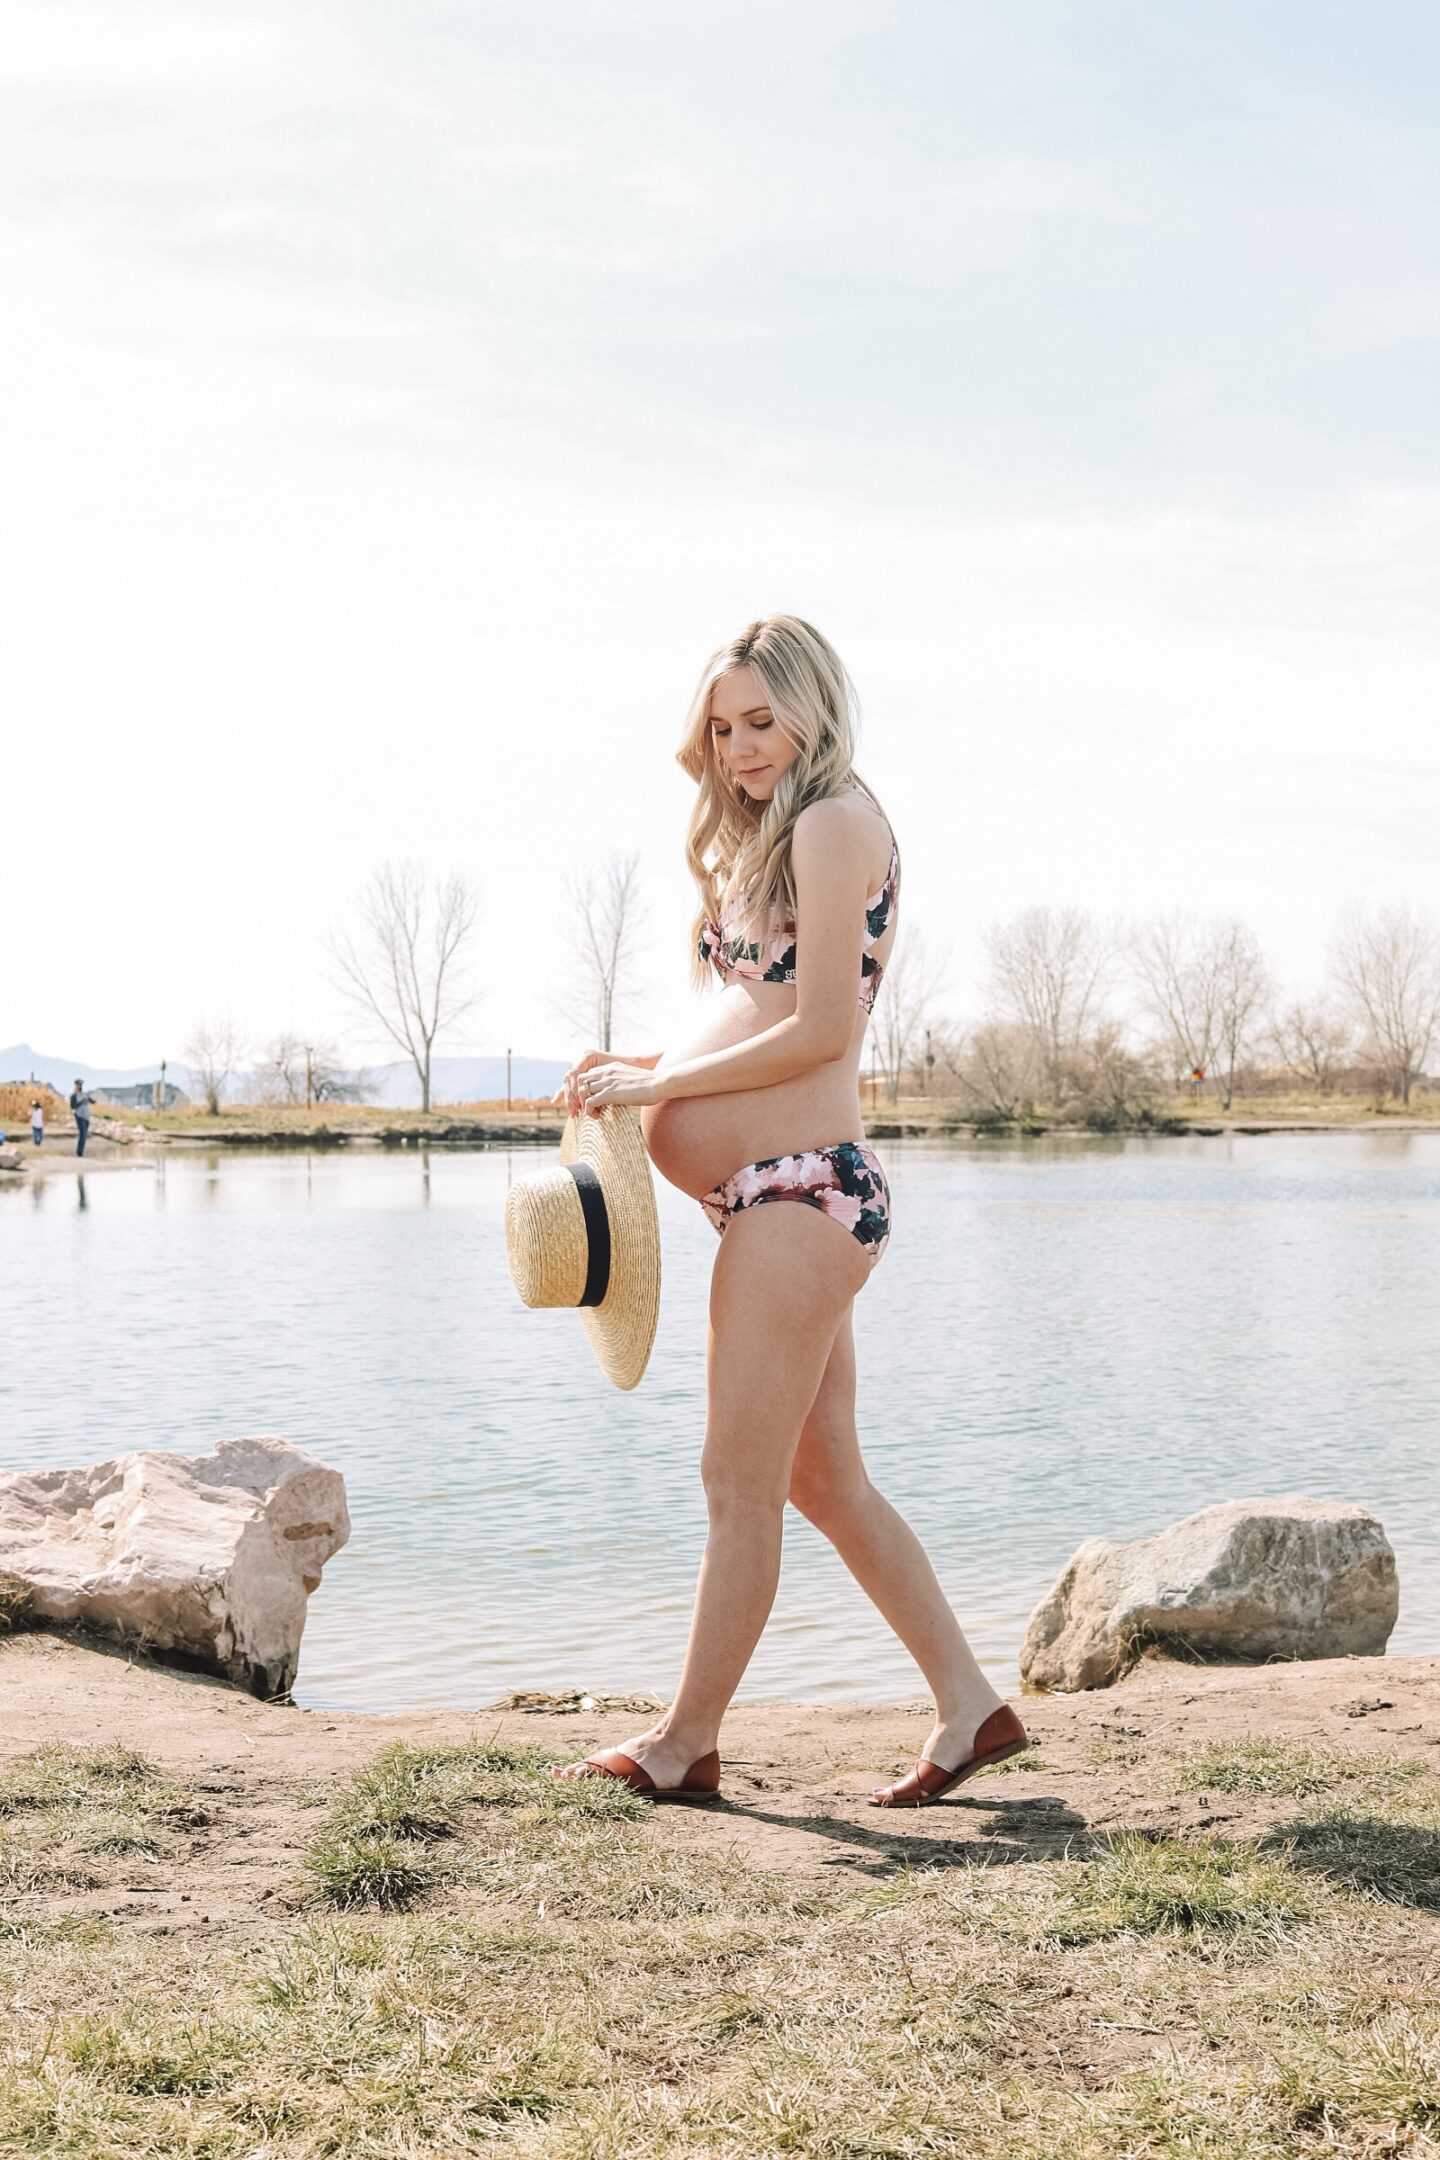 Albion Fit maternity swimwear style + body confidence